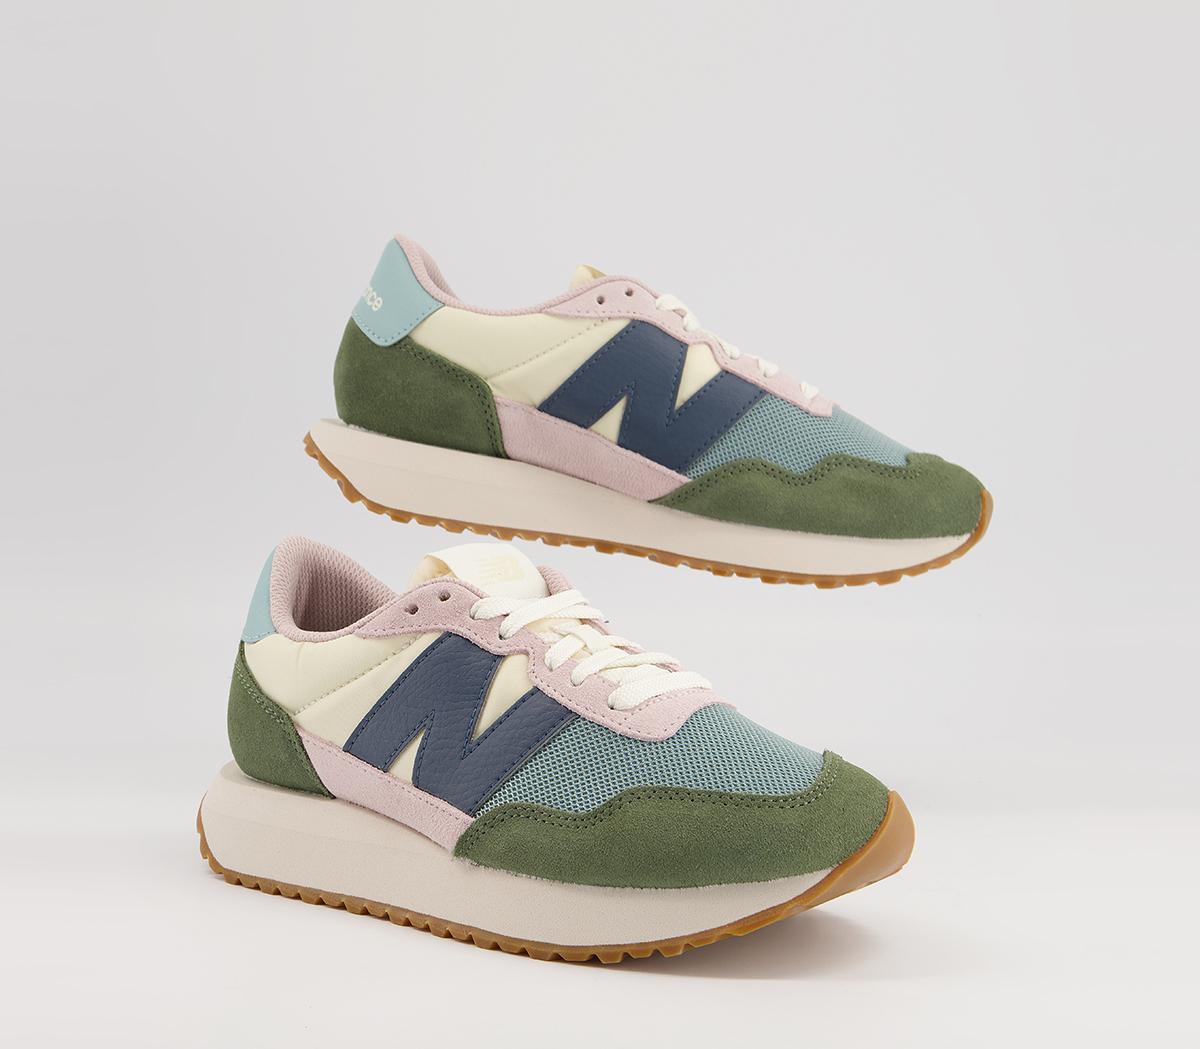 New Balance Ws237 Trainers Green Blue Purple - Women's Trainers